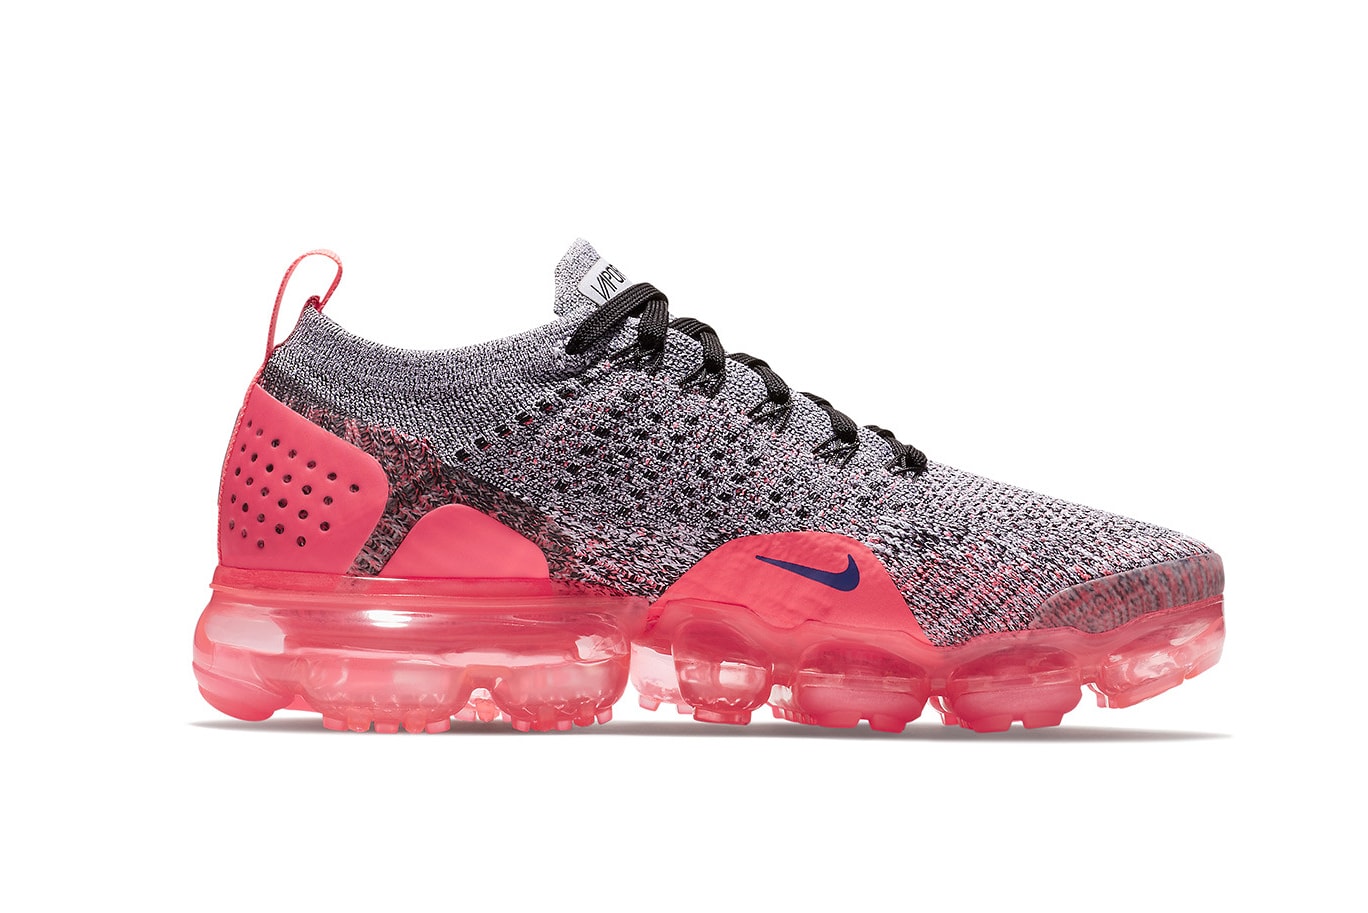 Nike Vapormax Flyknit 2.0 Three New Colors Air Max Day Pink Ice Blue Black Sneakers Shoes Running Training